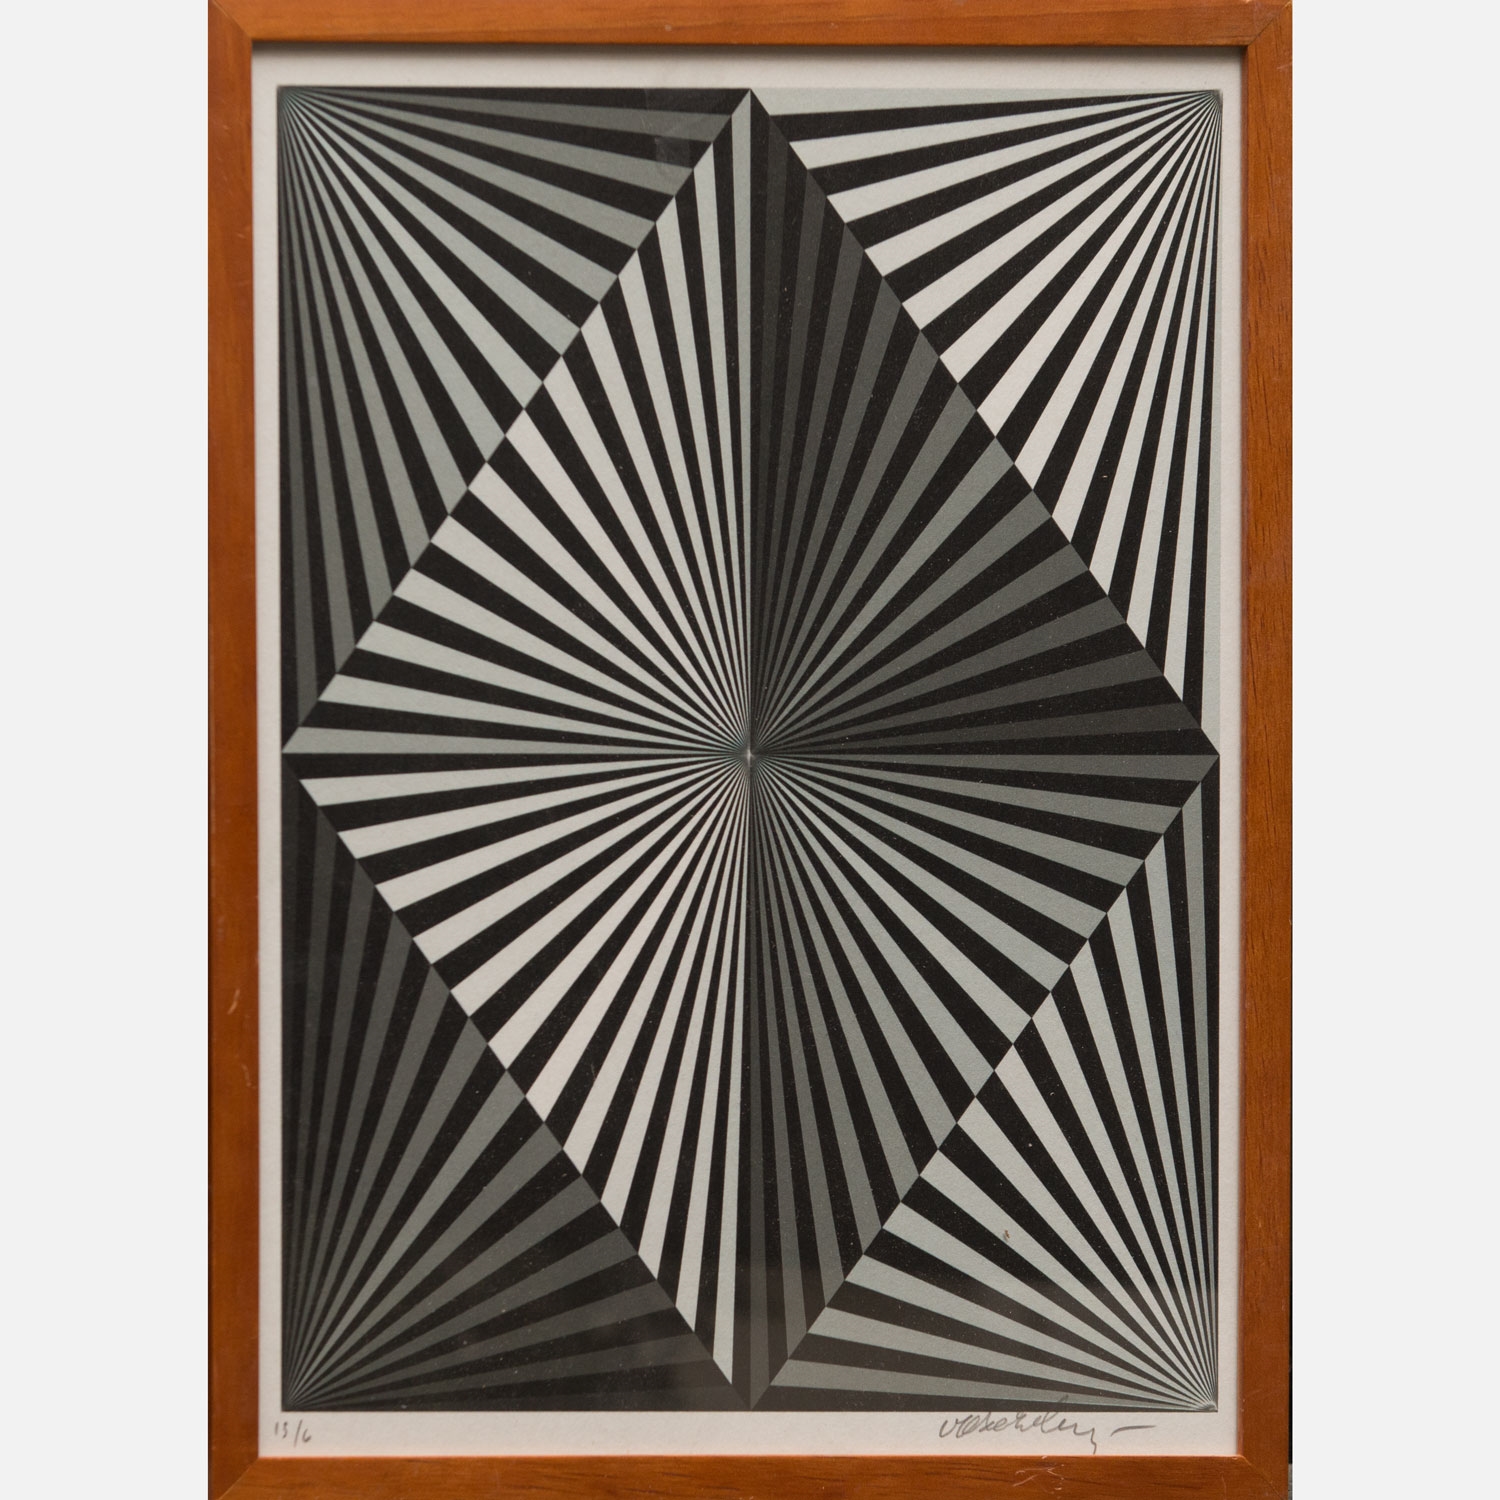 Artwork by Victor Vasarely, composition, Made of lithography on paper